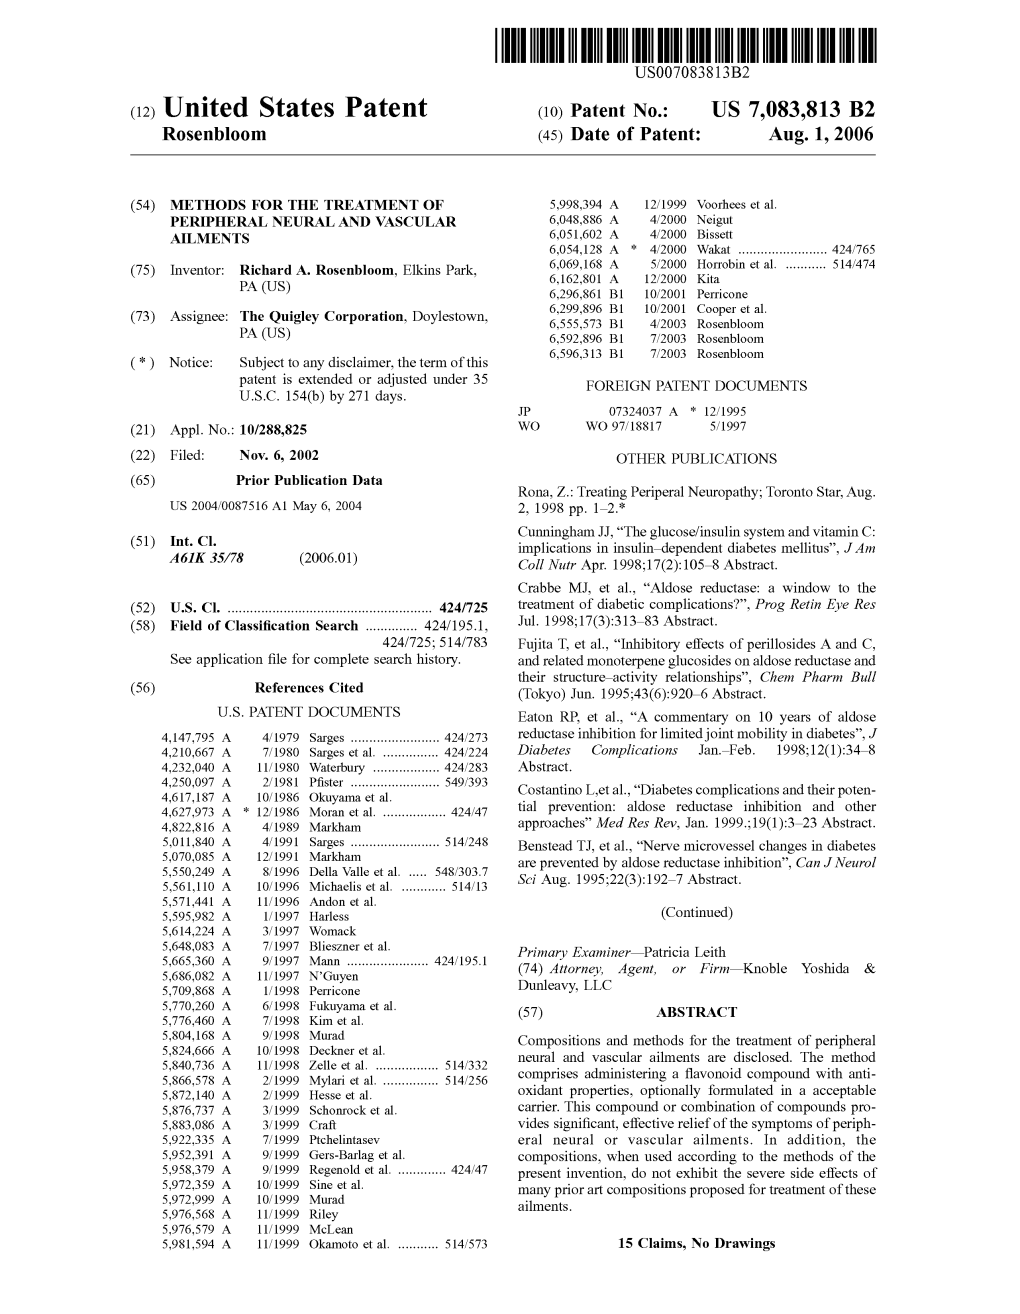 (12) United States Patent (10) Patent No.: US 7,083,813 B2 Rosenbloom (45) Date of Patent: Aug